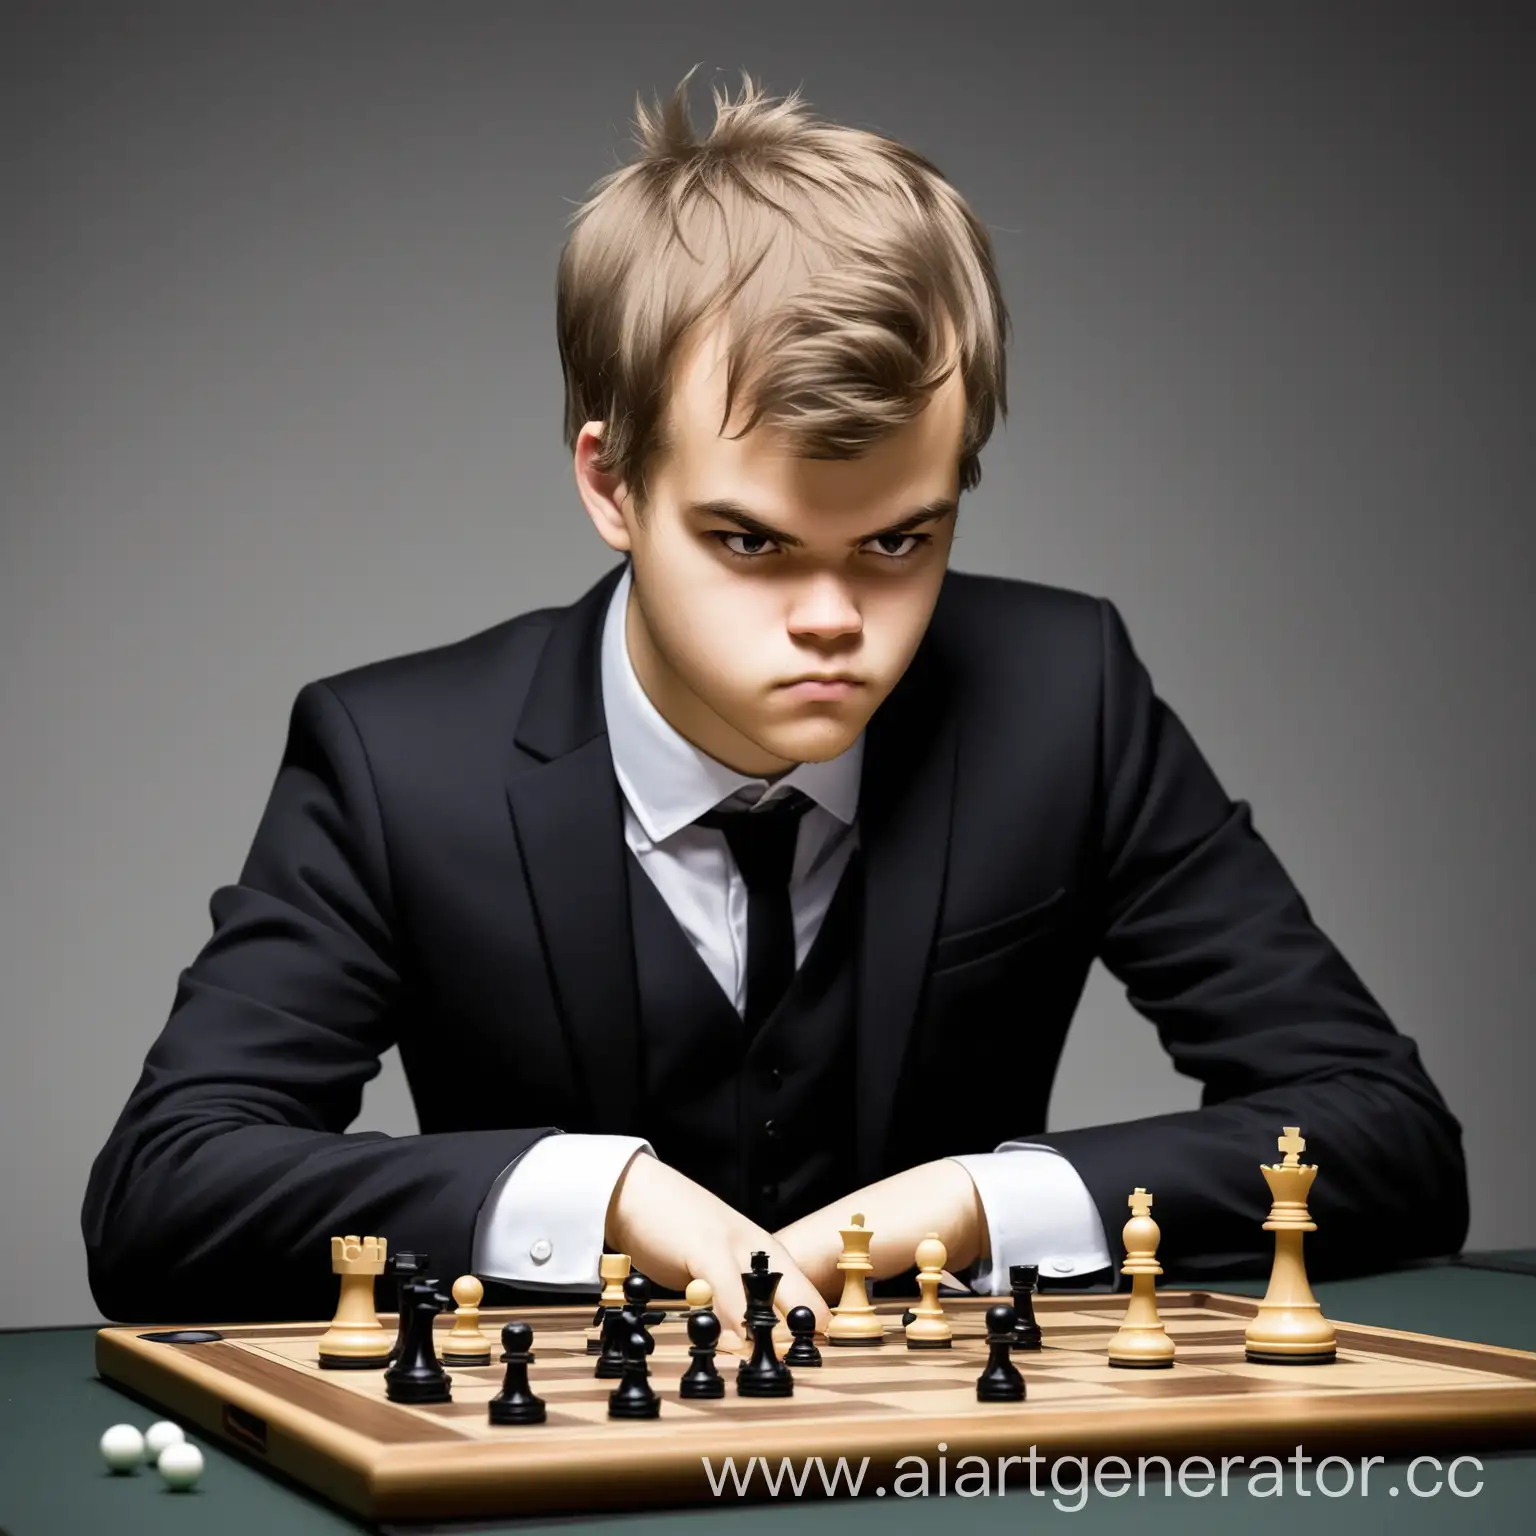 Magnus-Carlsen-Playing-Intensely-in-a-HighStakes-Chess-Match